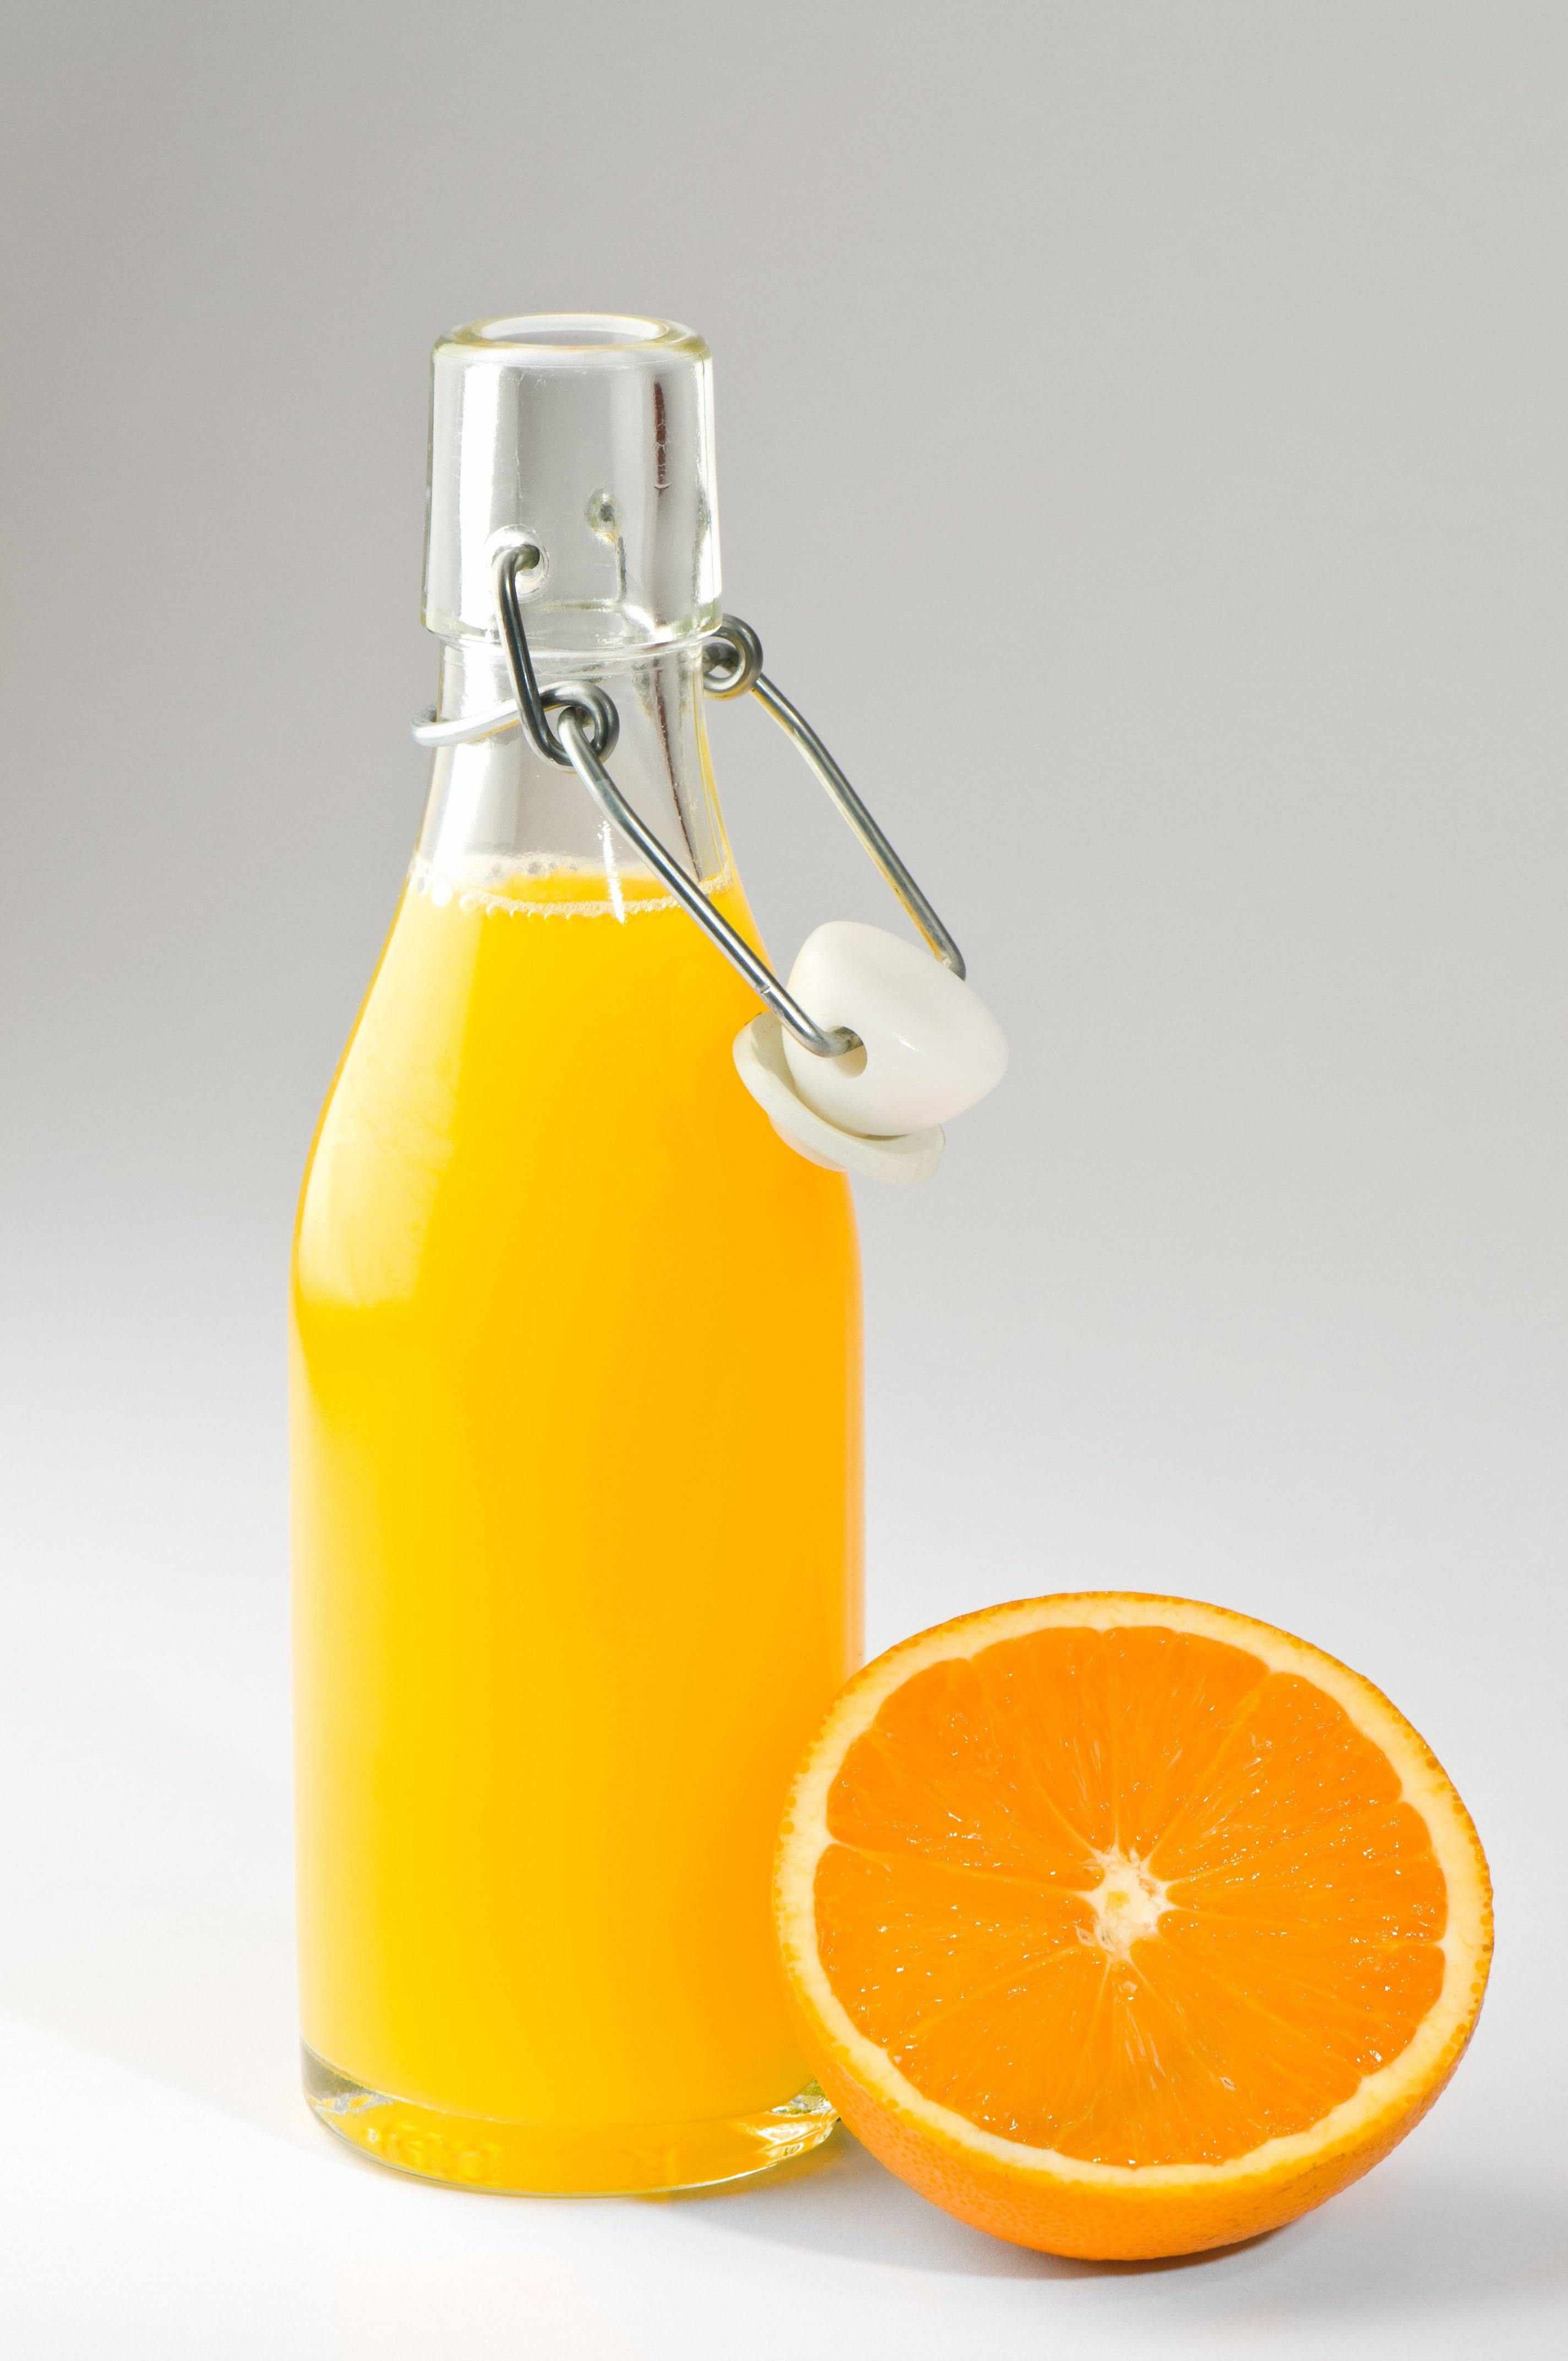 8.5 ounce swing top glass bottle filled with orange juice